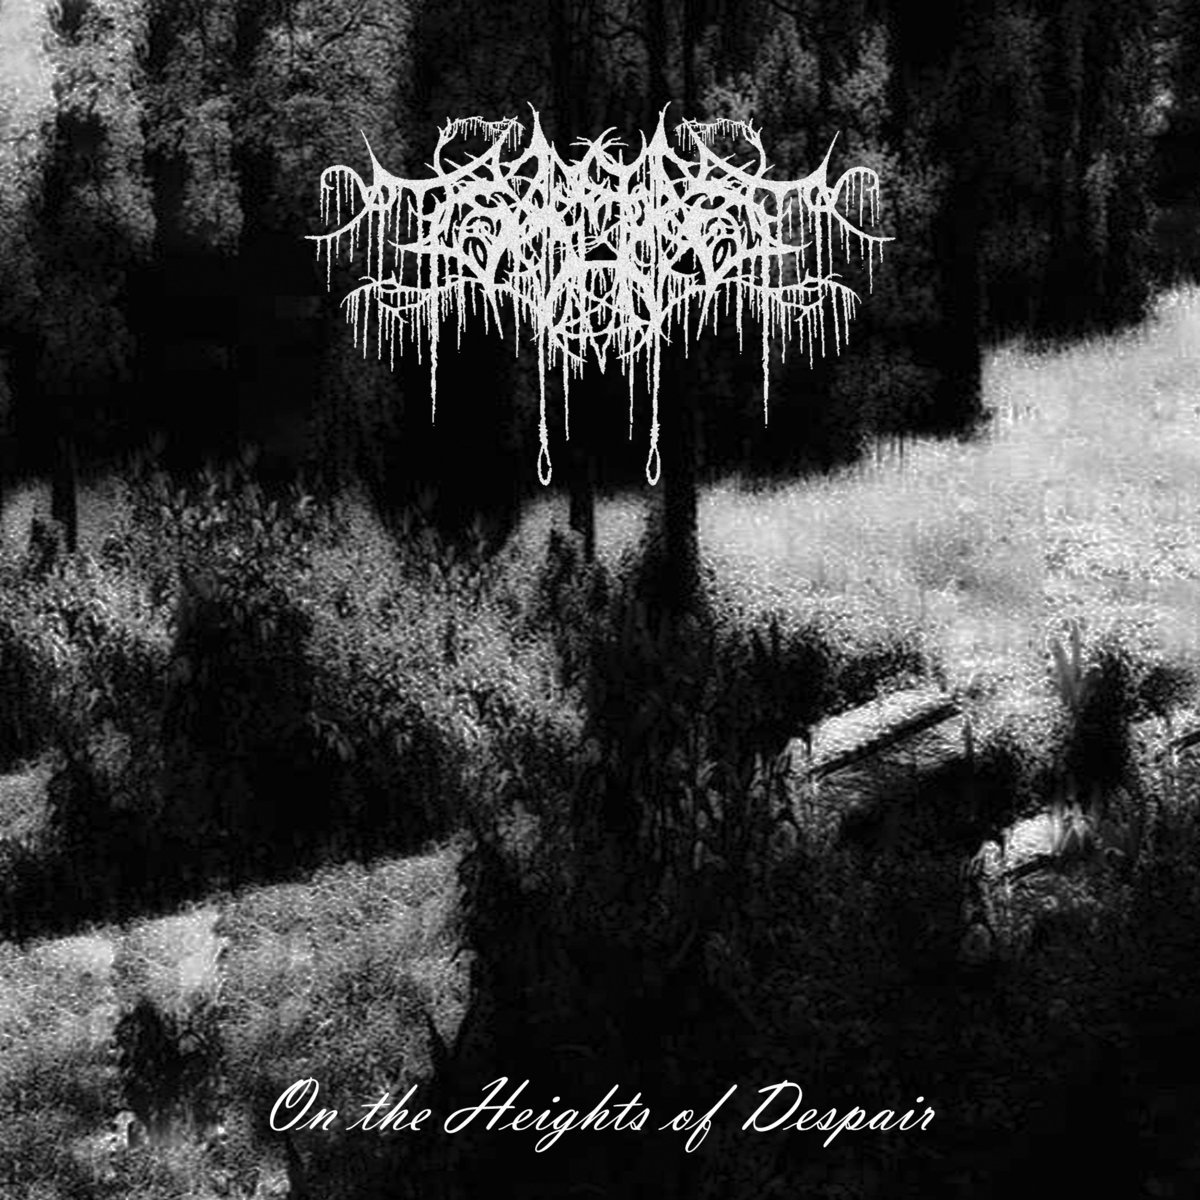 Heights artist. On the heights of Despair. Entwine - 2002 time of Despair обложка. «Tides of Despair» - Nocturnal depression. French depressive Black Metal, 2019 #albums. Sea of Despair Стельмахович.